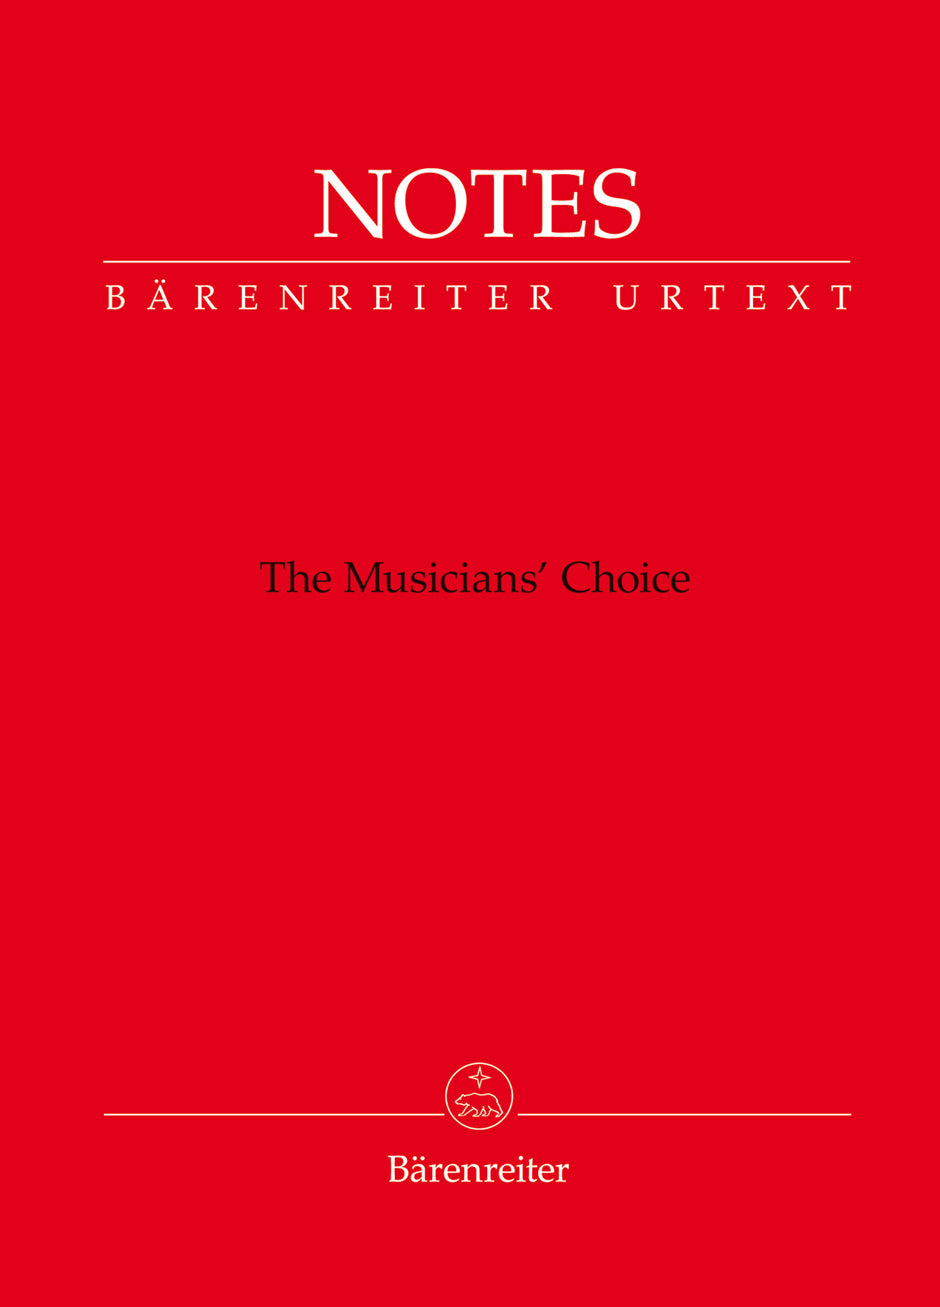 Bärenreiter: The Musician's Choice Notebook - Red Cover